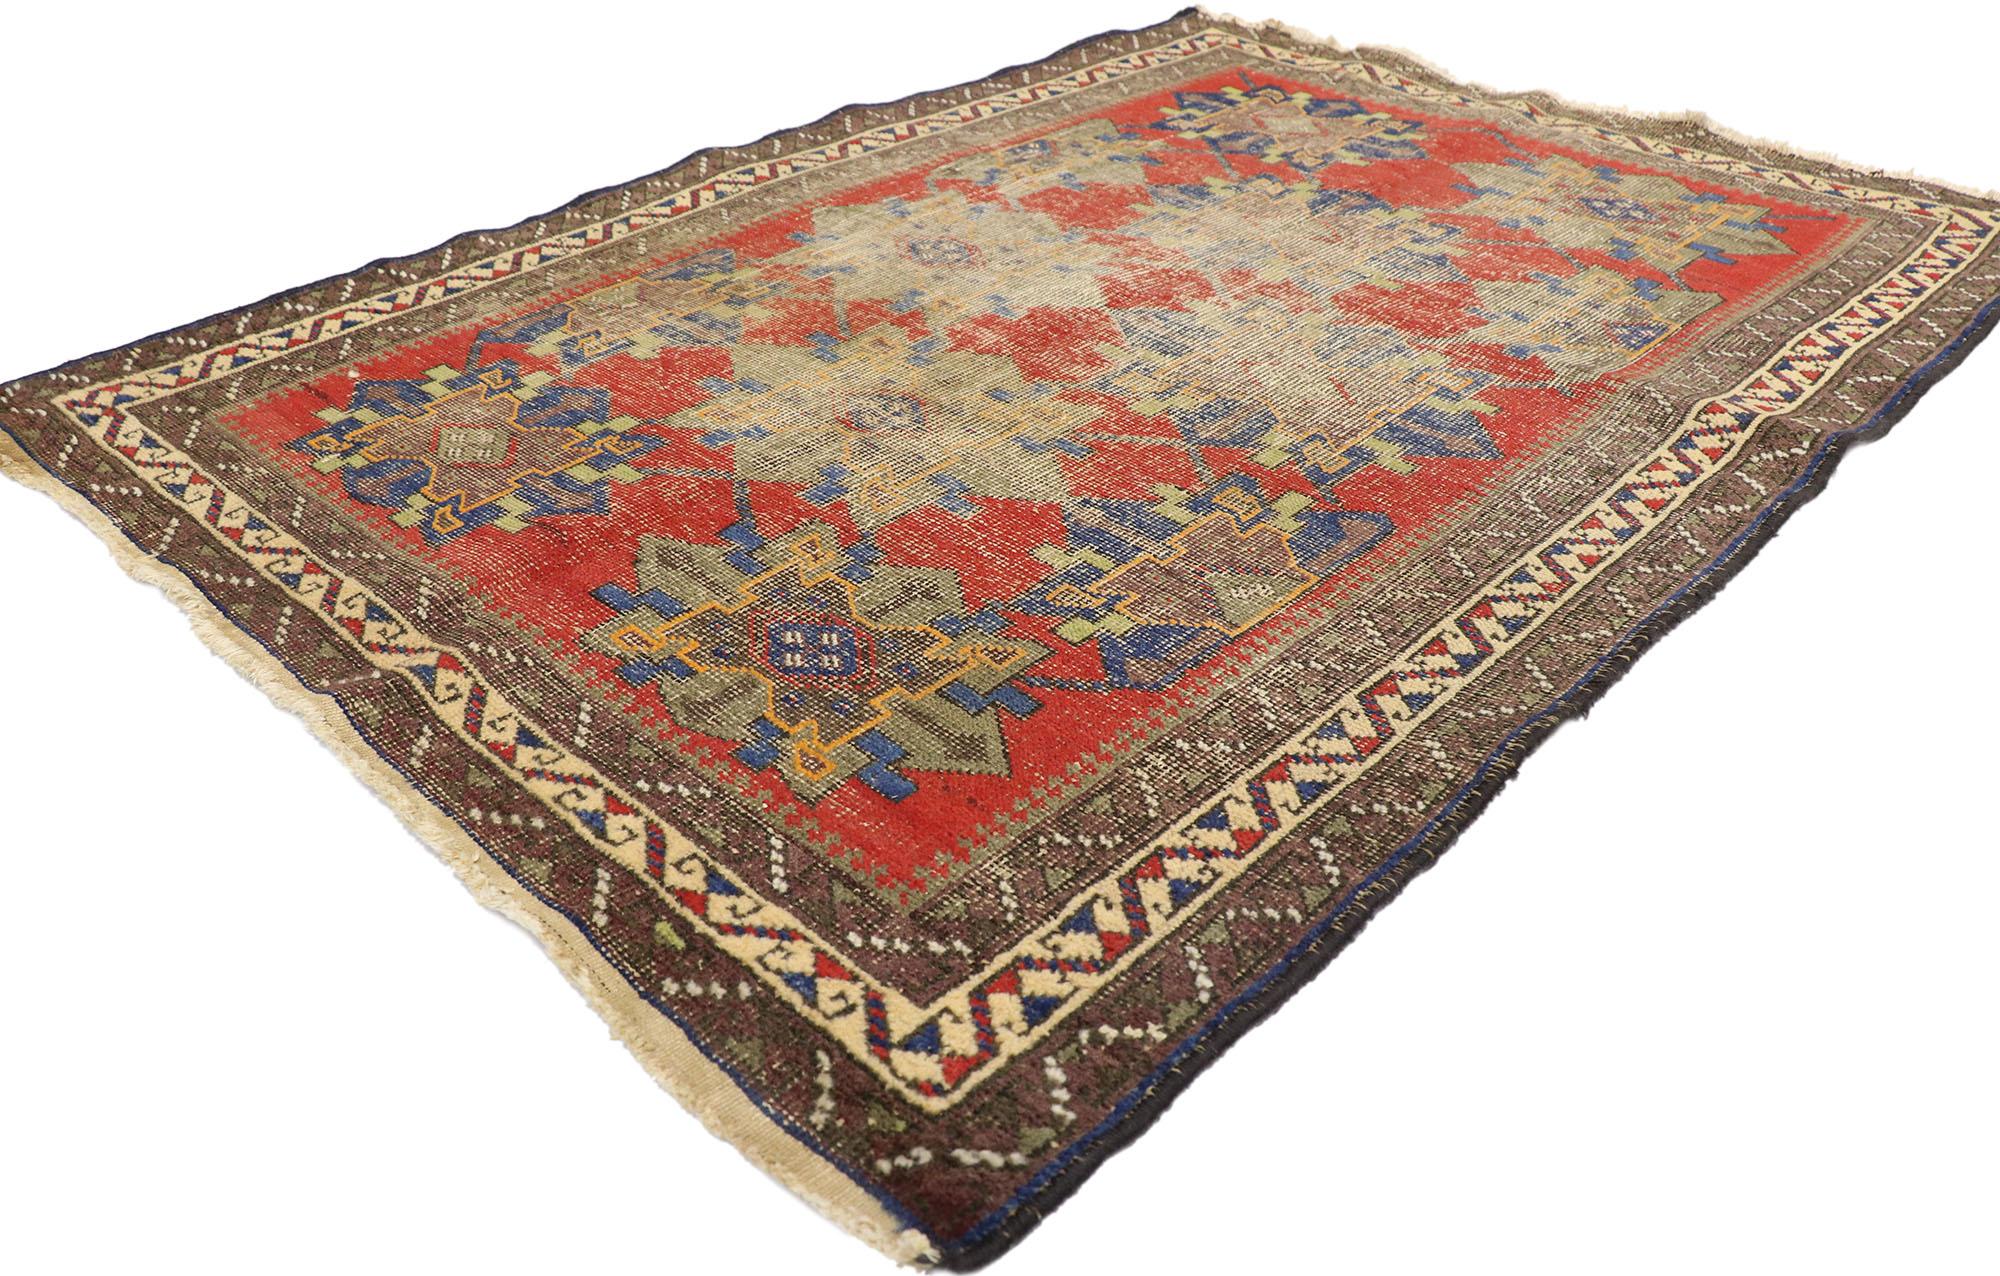 78003 Distressed Antique Persian Karabakh rug with Modern Rustic Style 03'08 x 05'01. Emanating sophistication and nomadic charm with rustic sensibility, this hand knotted wool distressed antique Persian Karabakh rug beautifully embodies a modern